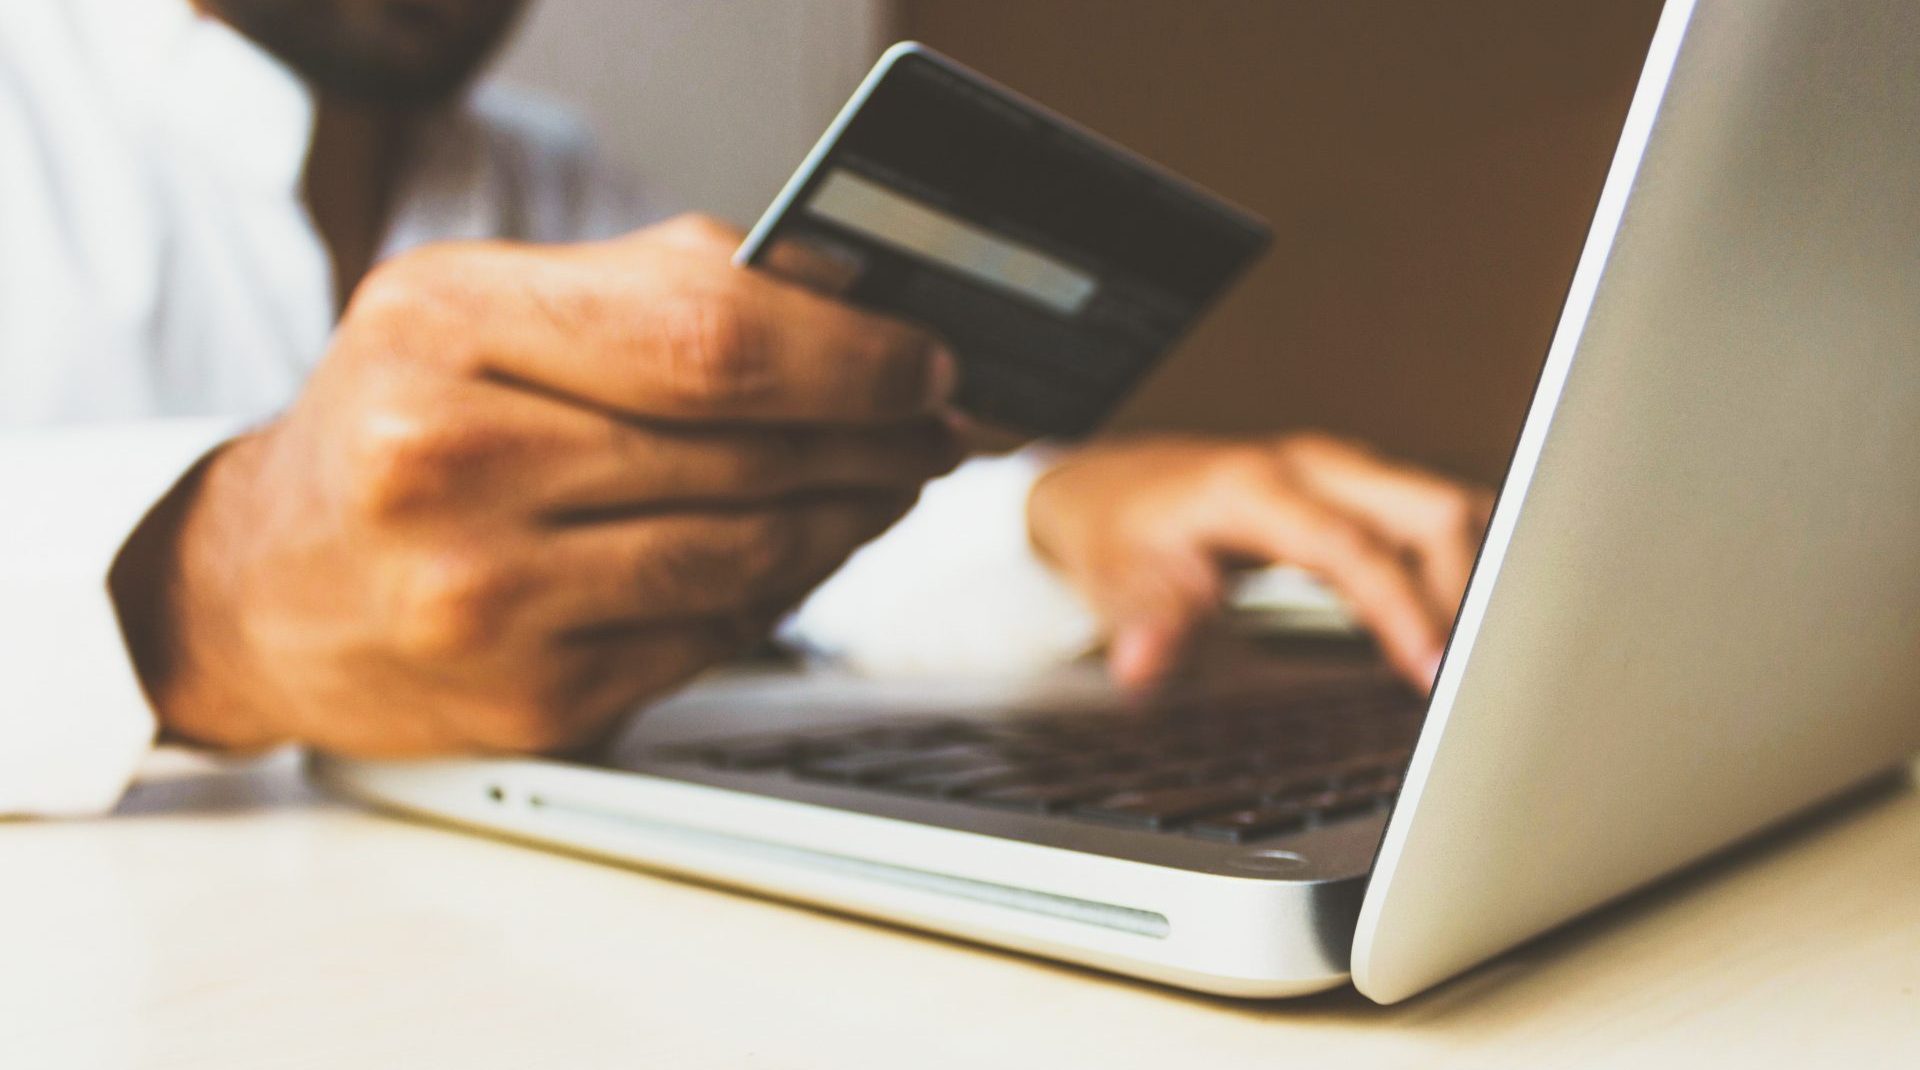 A person holds a credit card while making a purchase on a laptop. Photo by rupixen from Unsplash